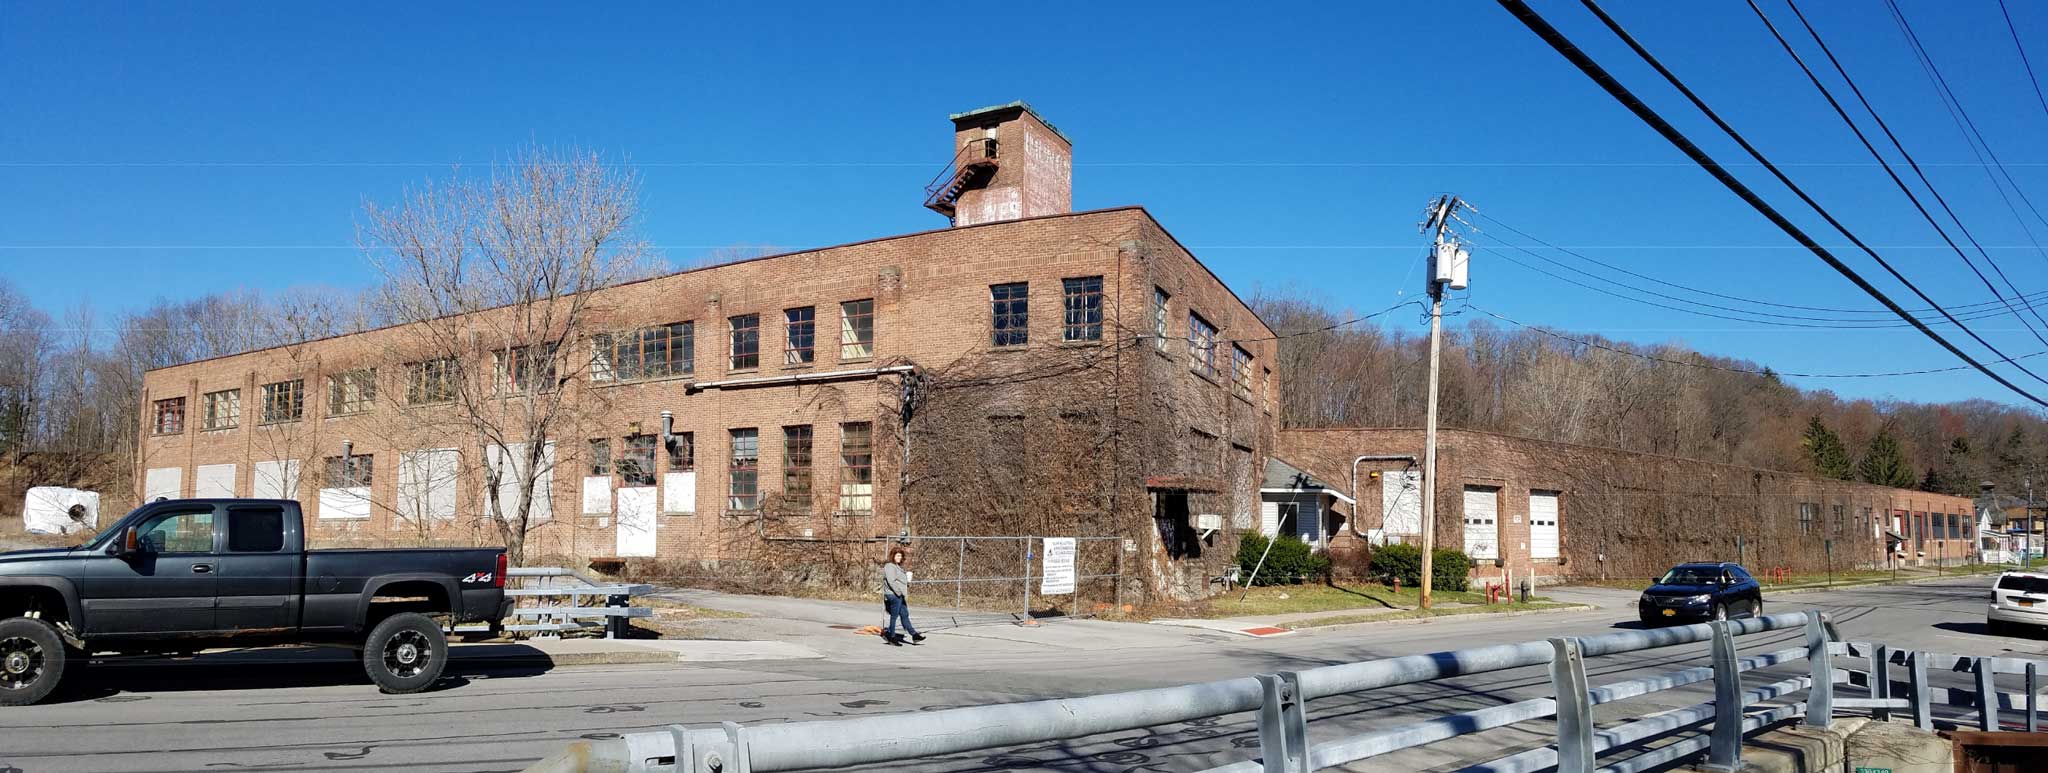 Photograph of the existing factory building on the Angelica brownfield redevelopment site. In urban planning, brownfield land is any previously developed land that is not currently in use that may be potentially contaminated. The term is also used to describe land previously used for industrial or commercial purposes with known or suspected pollution including soil contamination due to hazardous waste.